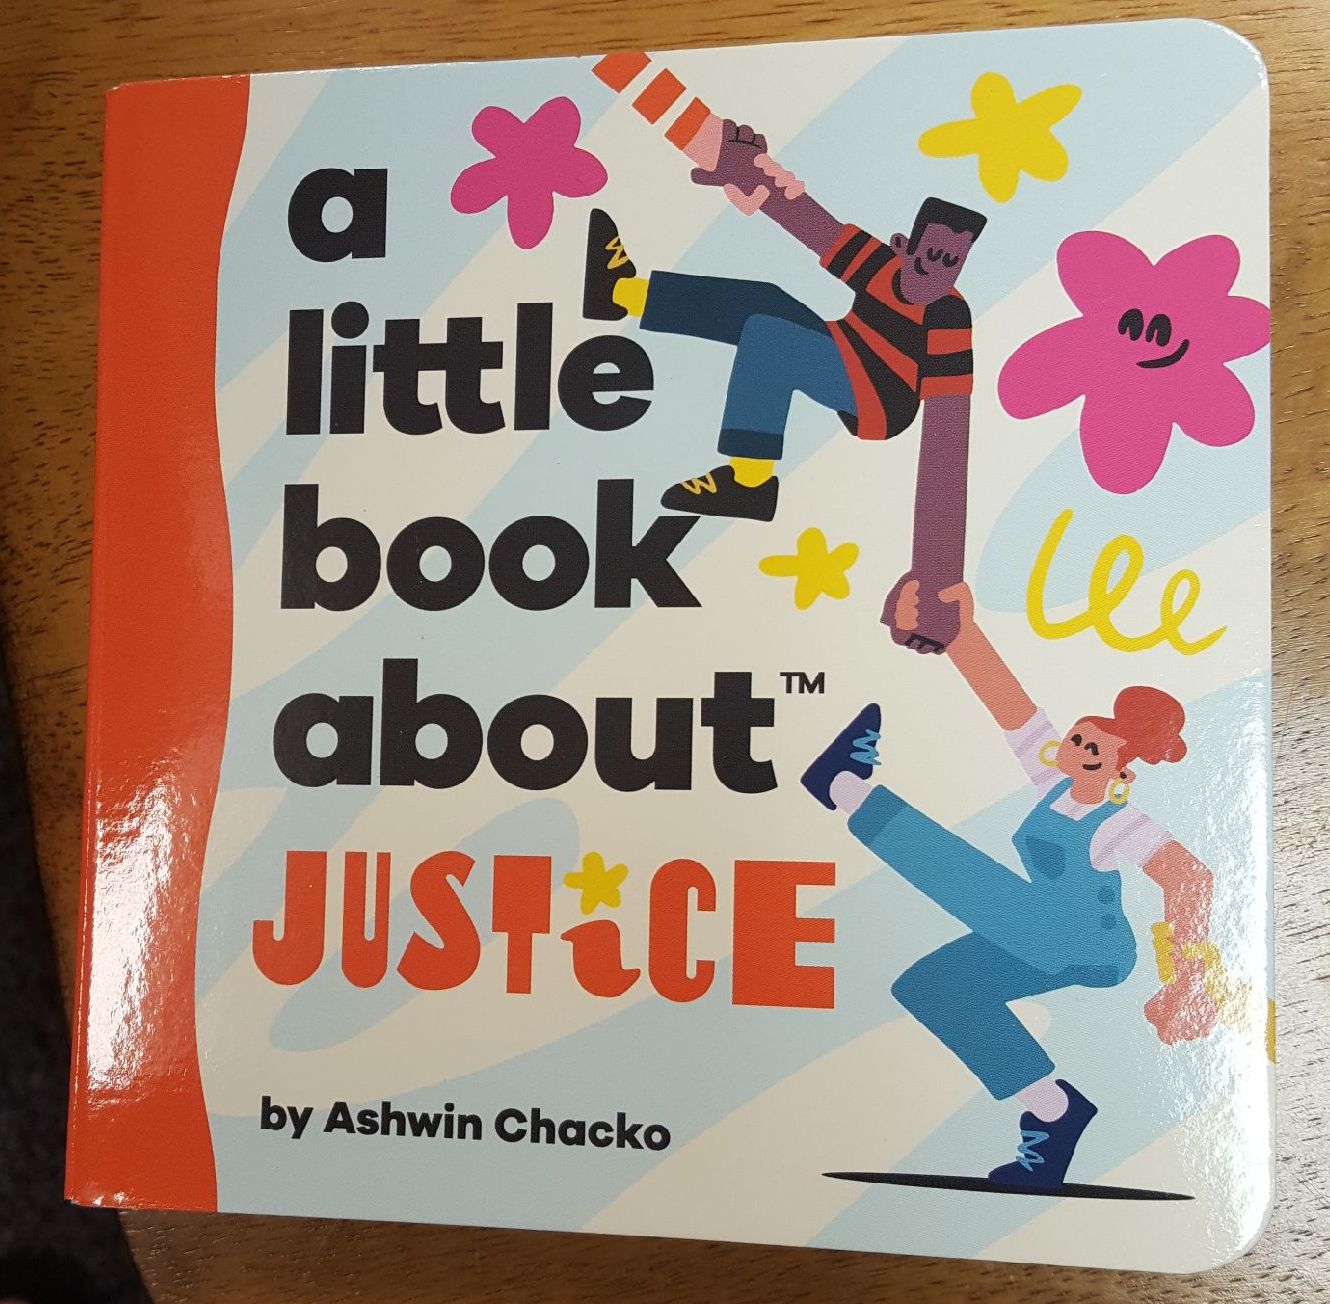 Books: A Little Book About Justice